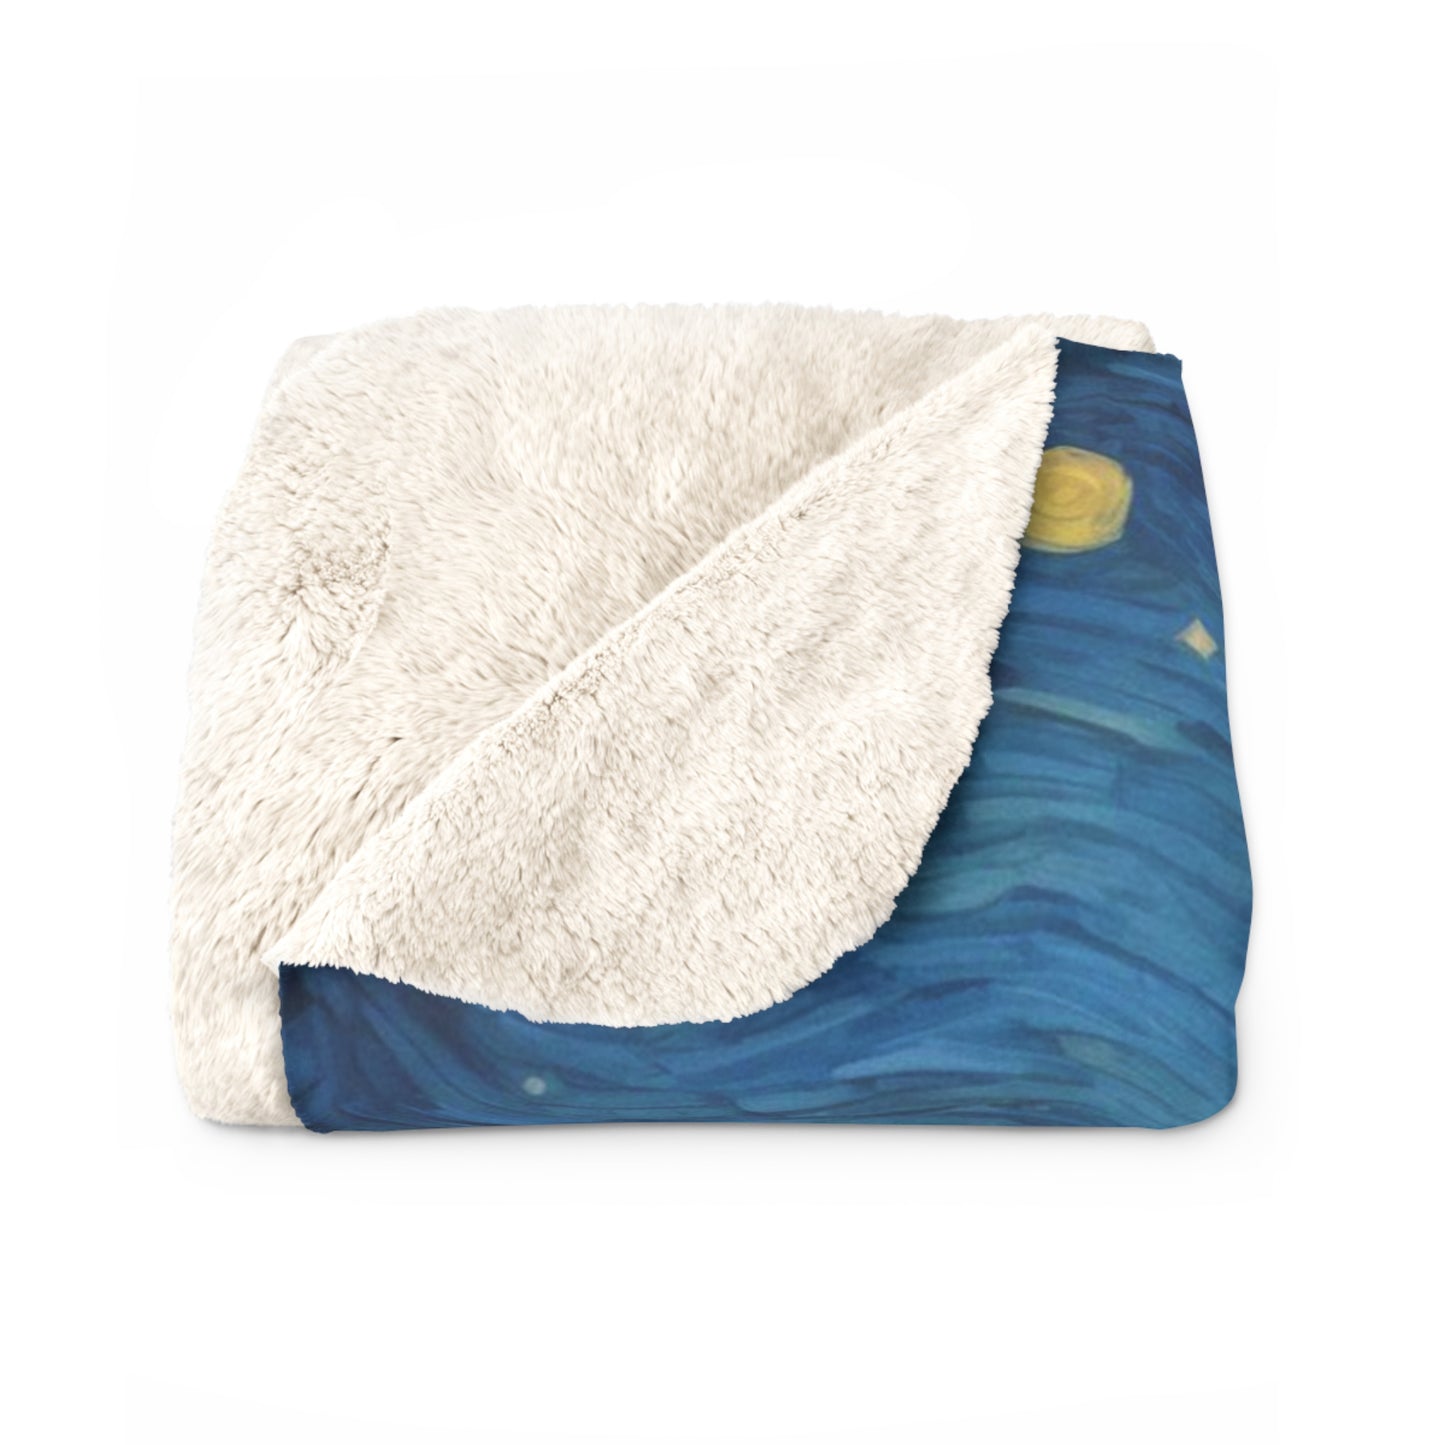 Isle Royale National Park Sherpa Blanket - The Starry Night